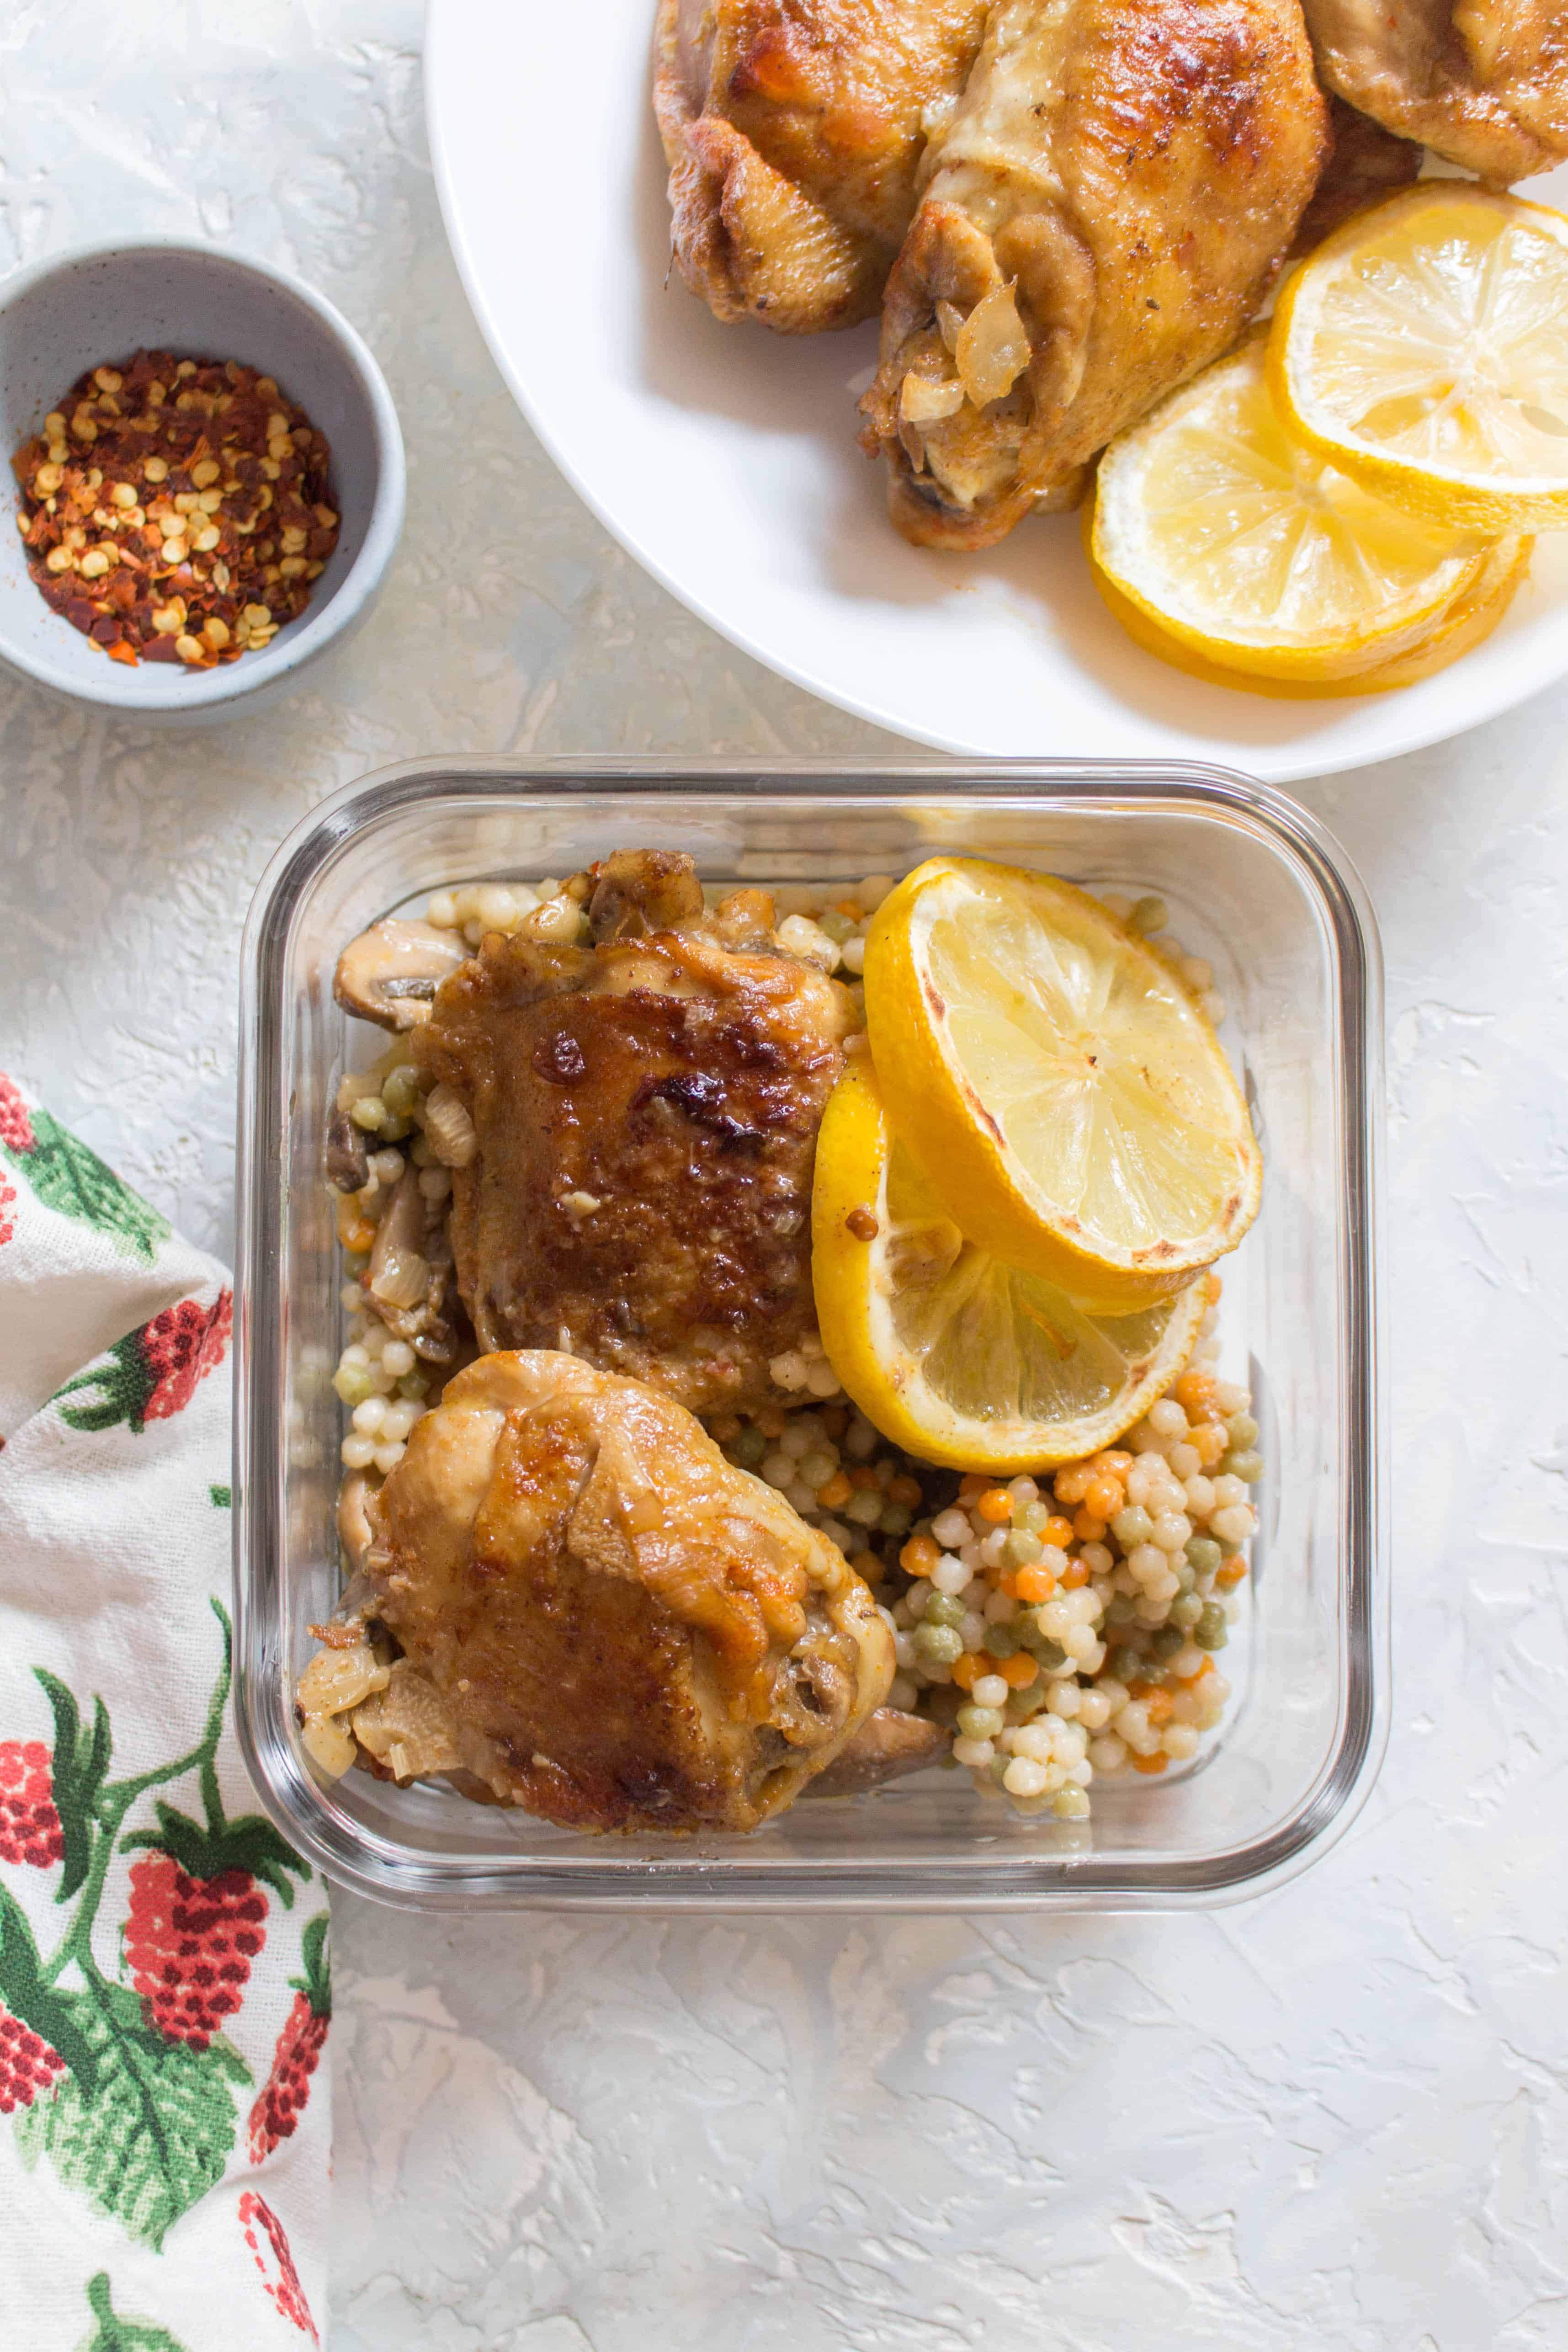 Get dinner on the table in under 30 minutes with this Instant Pot Lemon Garlic Chicken. Tender and juicy with a creamy sauce, this lemon garlic chicken is full of flavour and will have you reaching for seconds. Non Instant Pot instructions included.